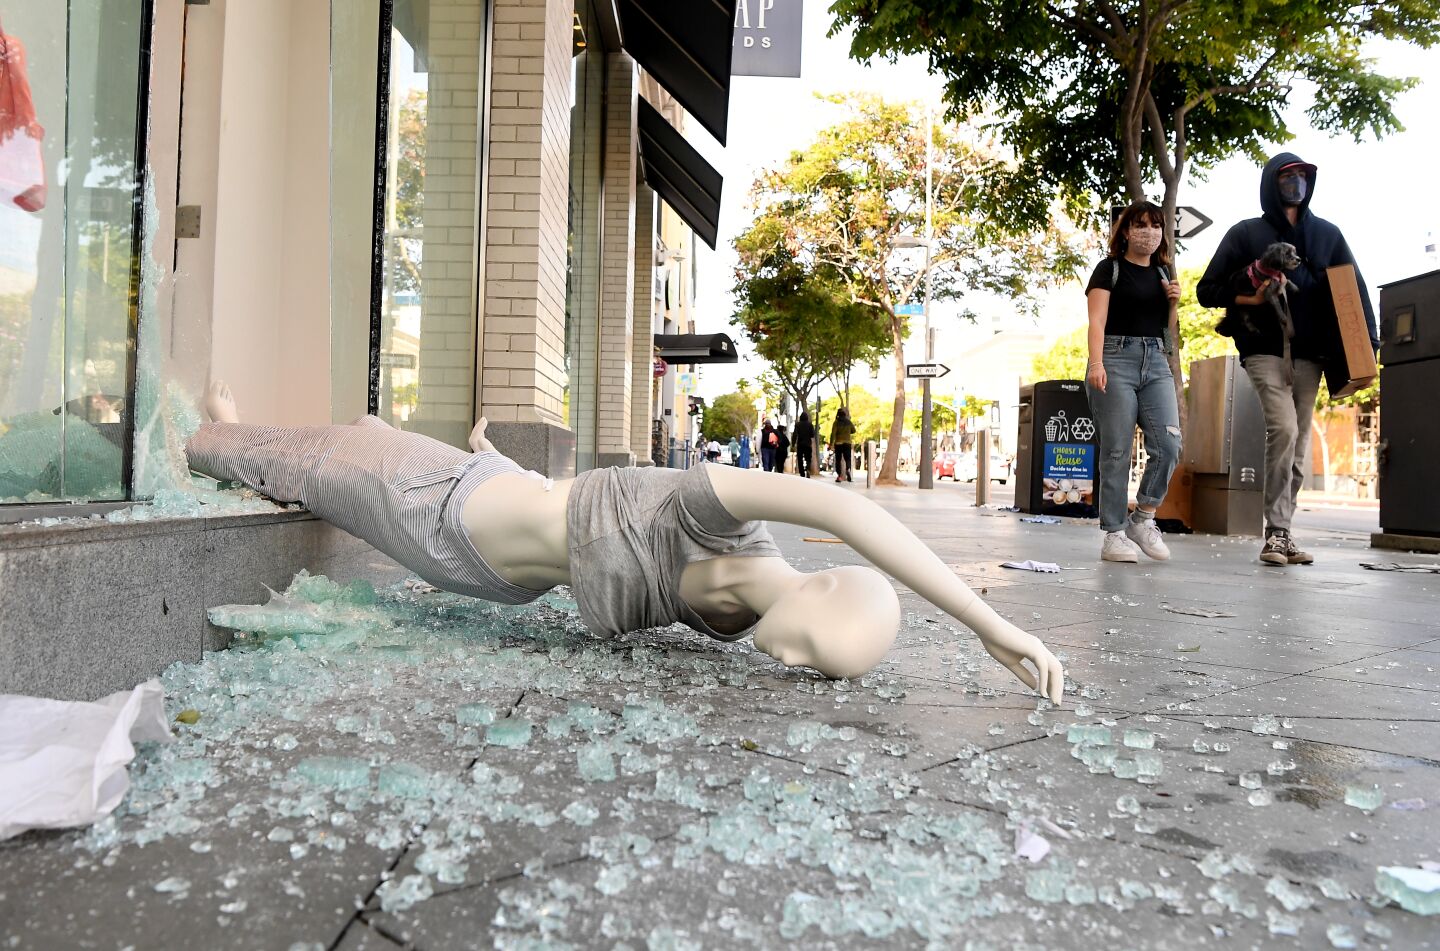 Broken glass from a looted store covers the sidewalk in Santa Monica.